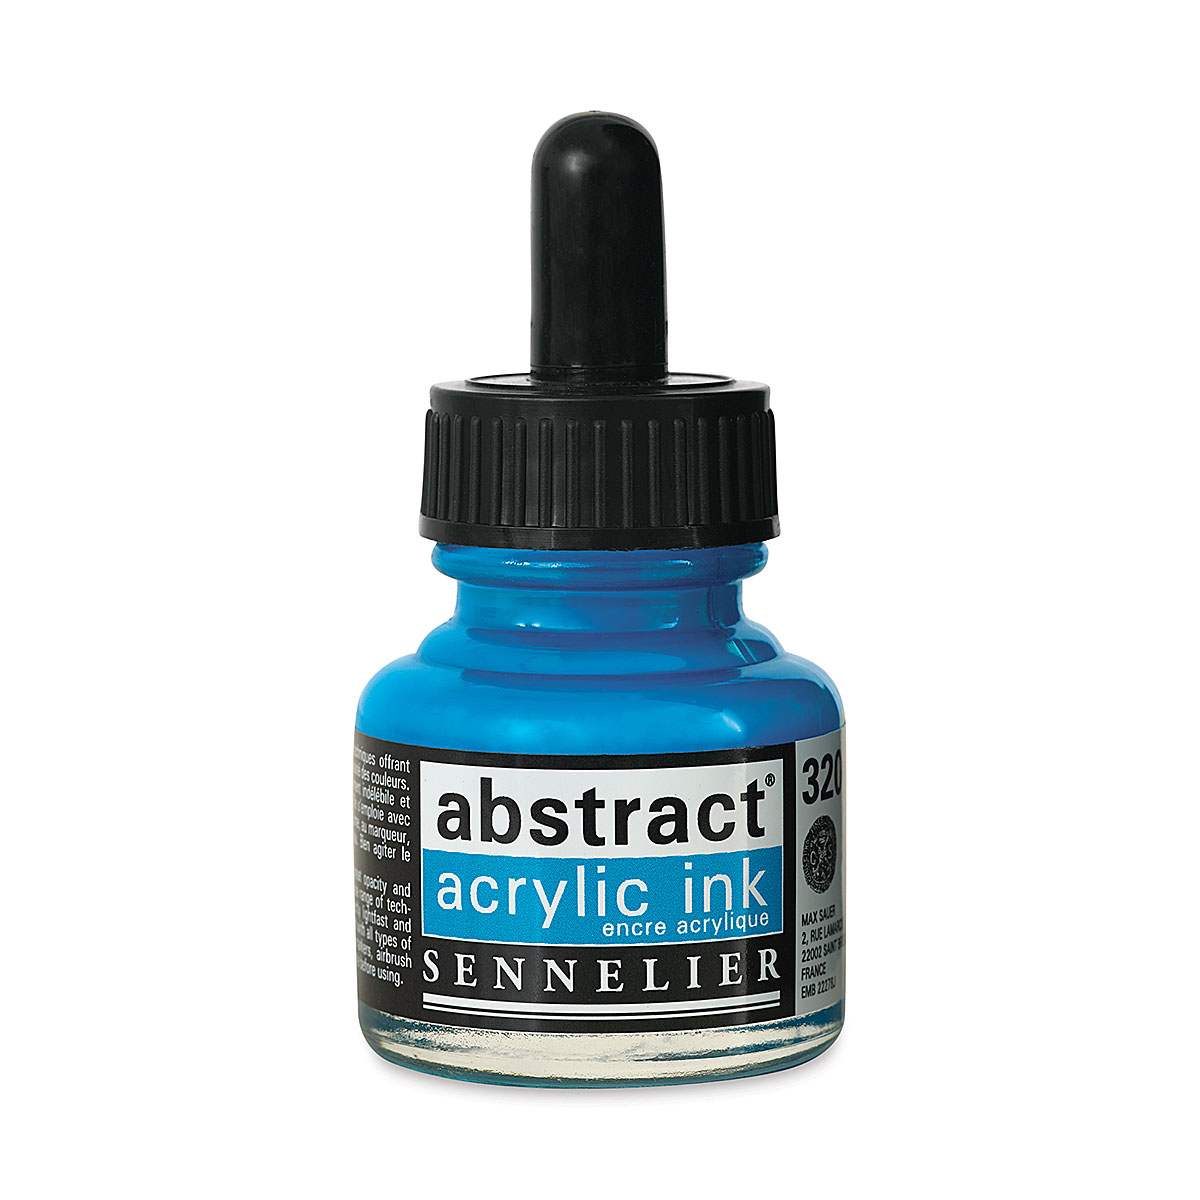 Sennelier Abstract Acrylic Ink - Azure Blue, 30ml